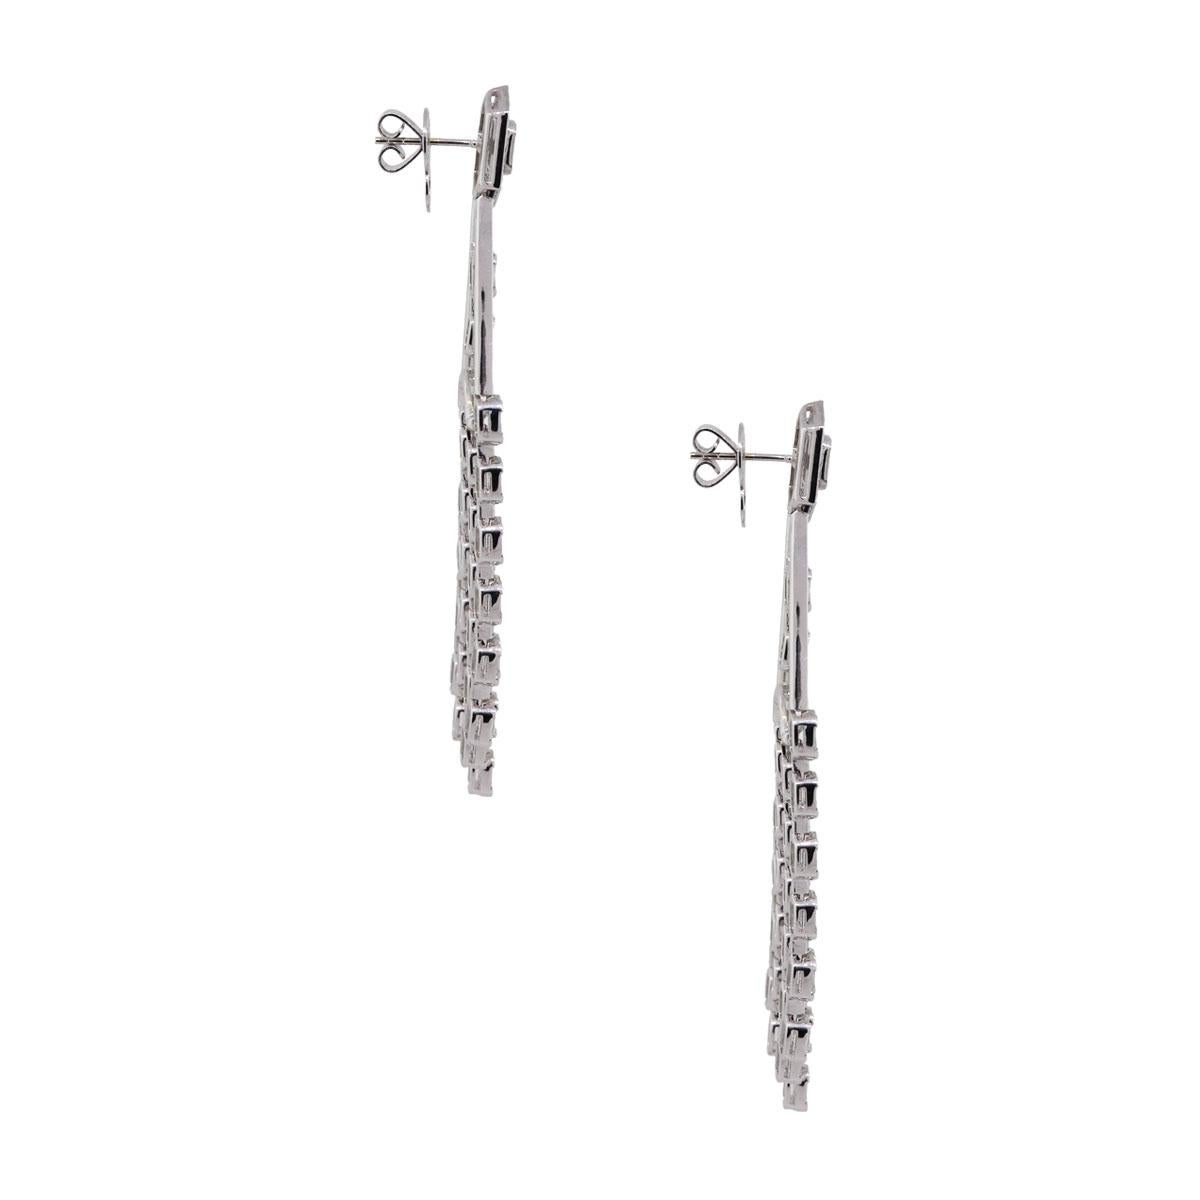 Material: 18k white gold
Diamond Details: Approximately 1ctw of round brilliant diamonds (158 stones). Approximately 10.11ctw of baguette shape diamonds (340 stones). Diamonds are G/H in color and VS in clarity
Earring Measurements: 2″ x 0.17″ x